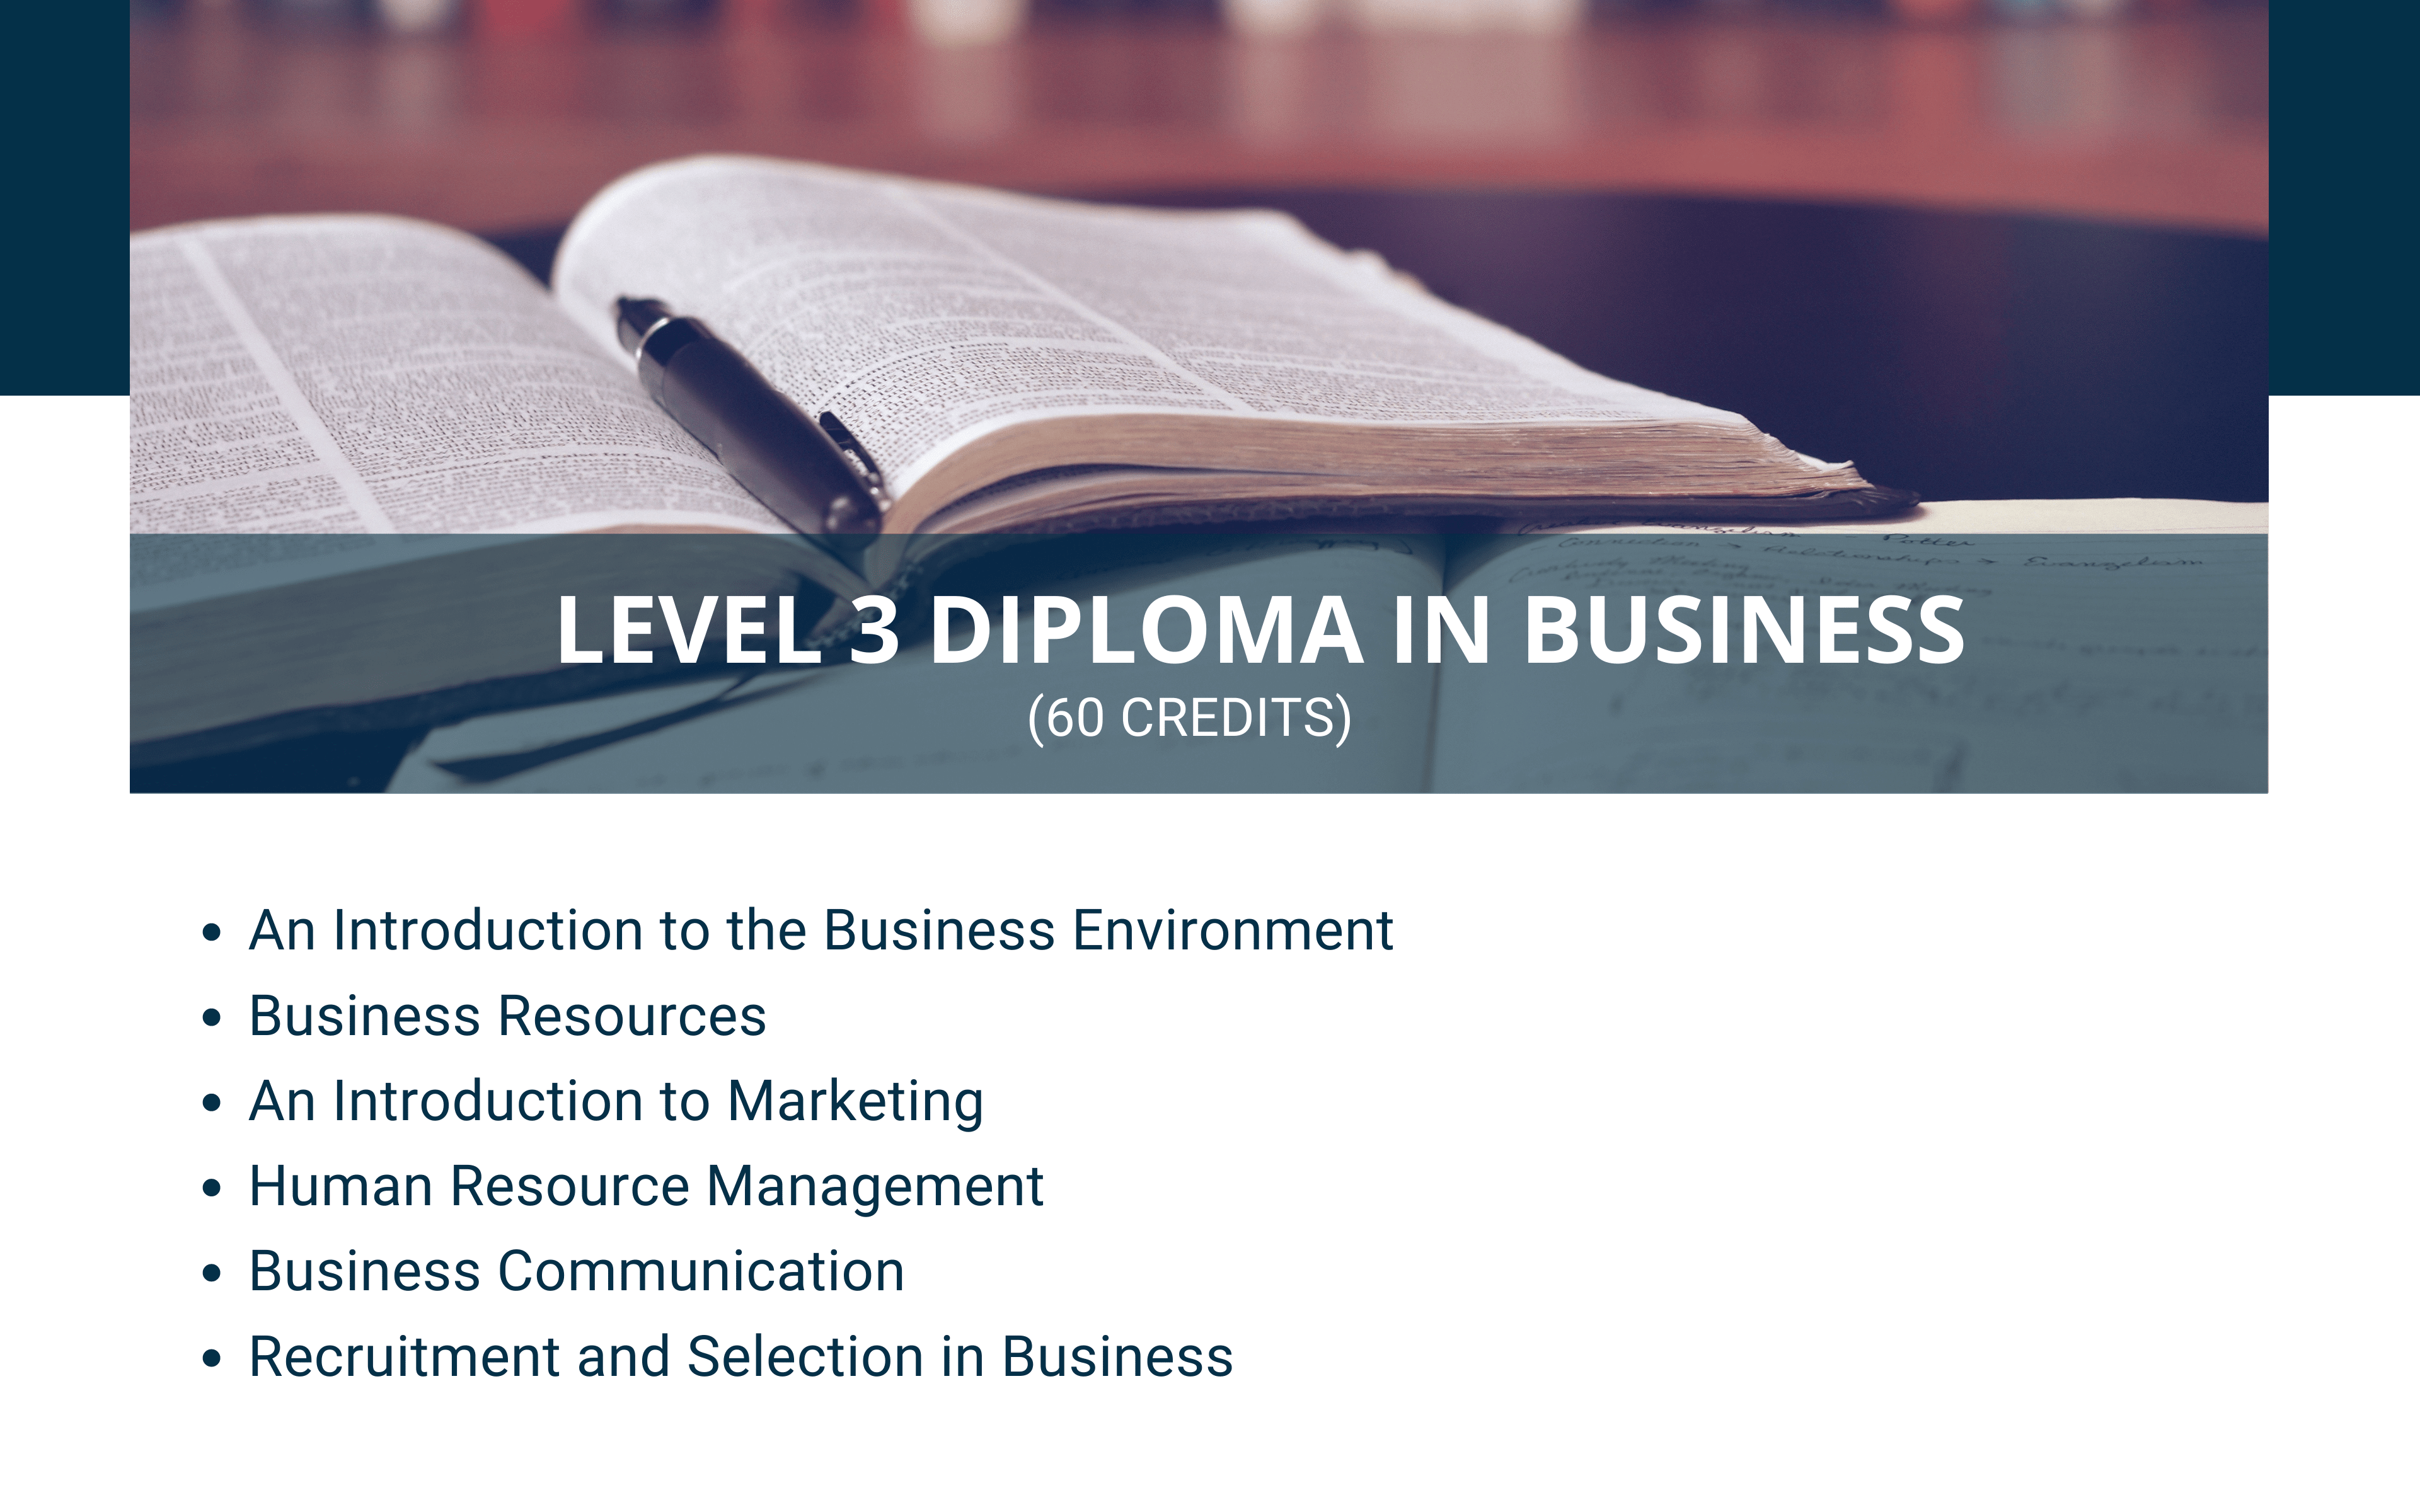 Level 3 Diploma in Business (60 credits)